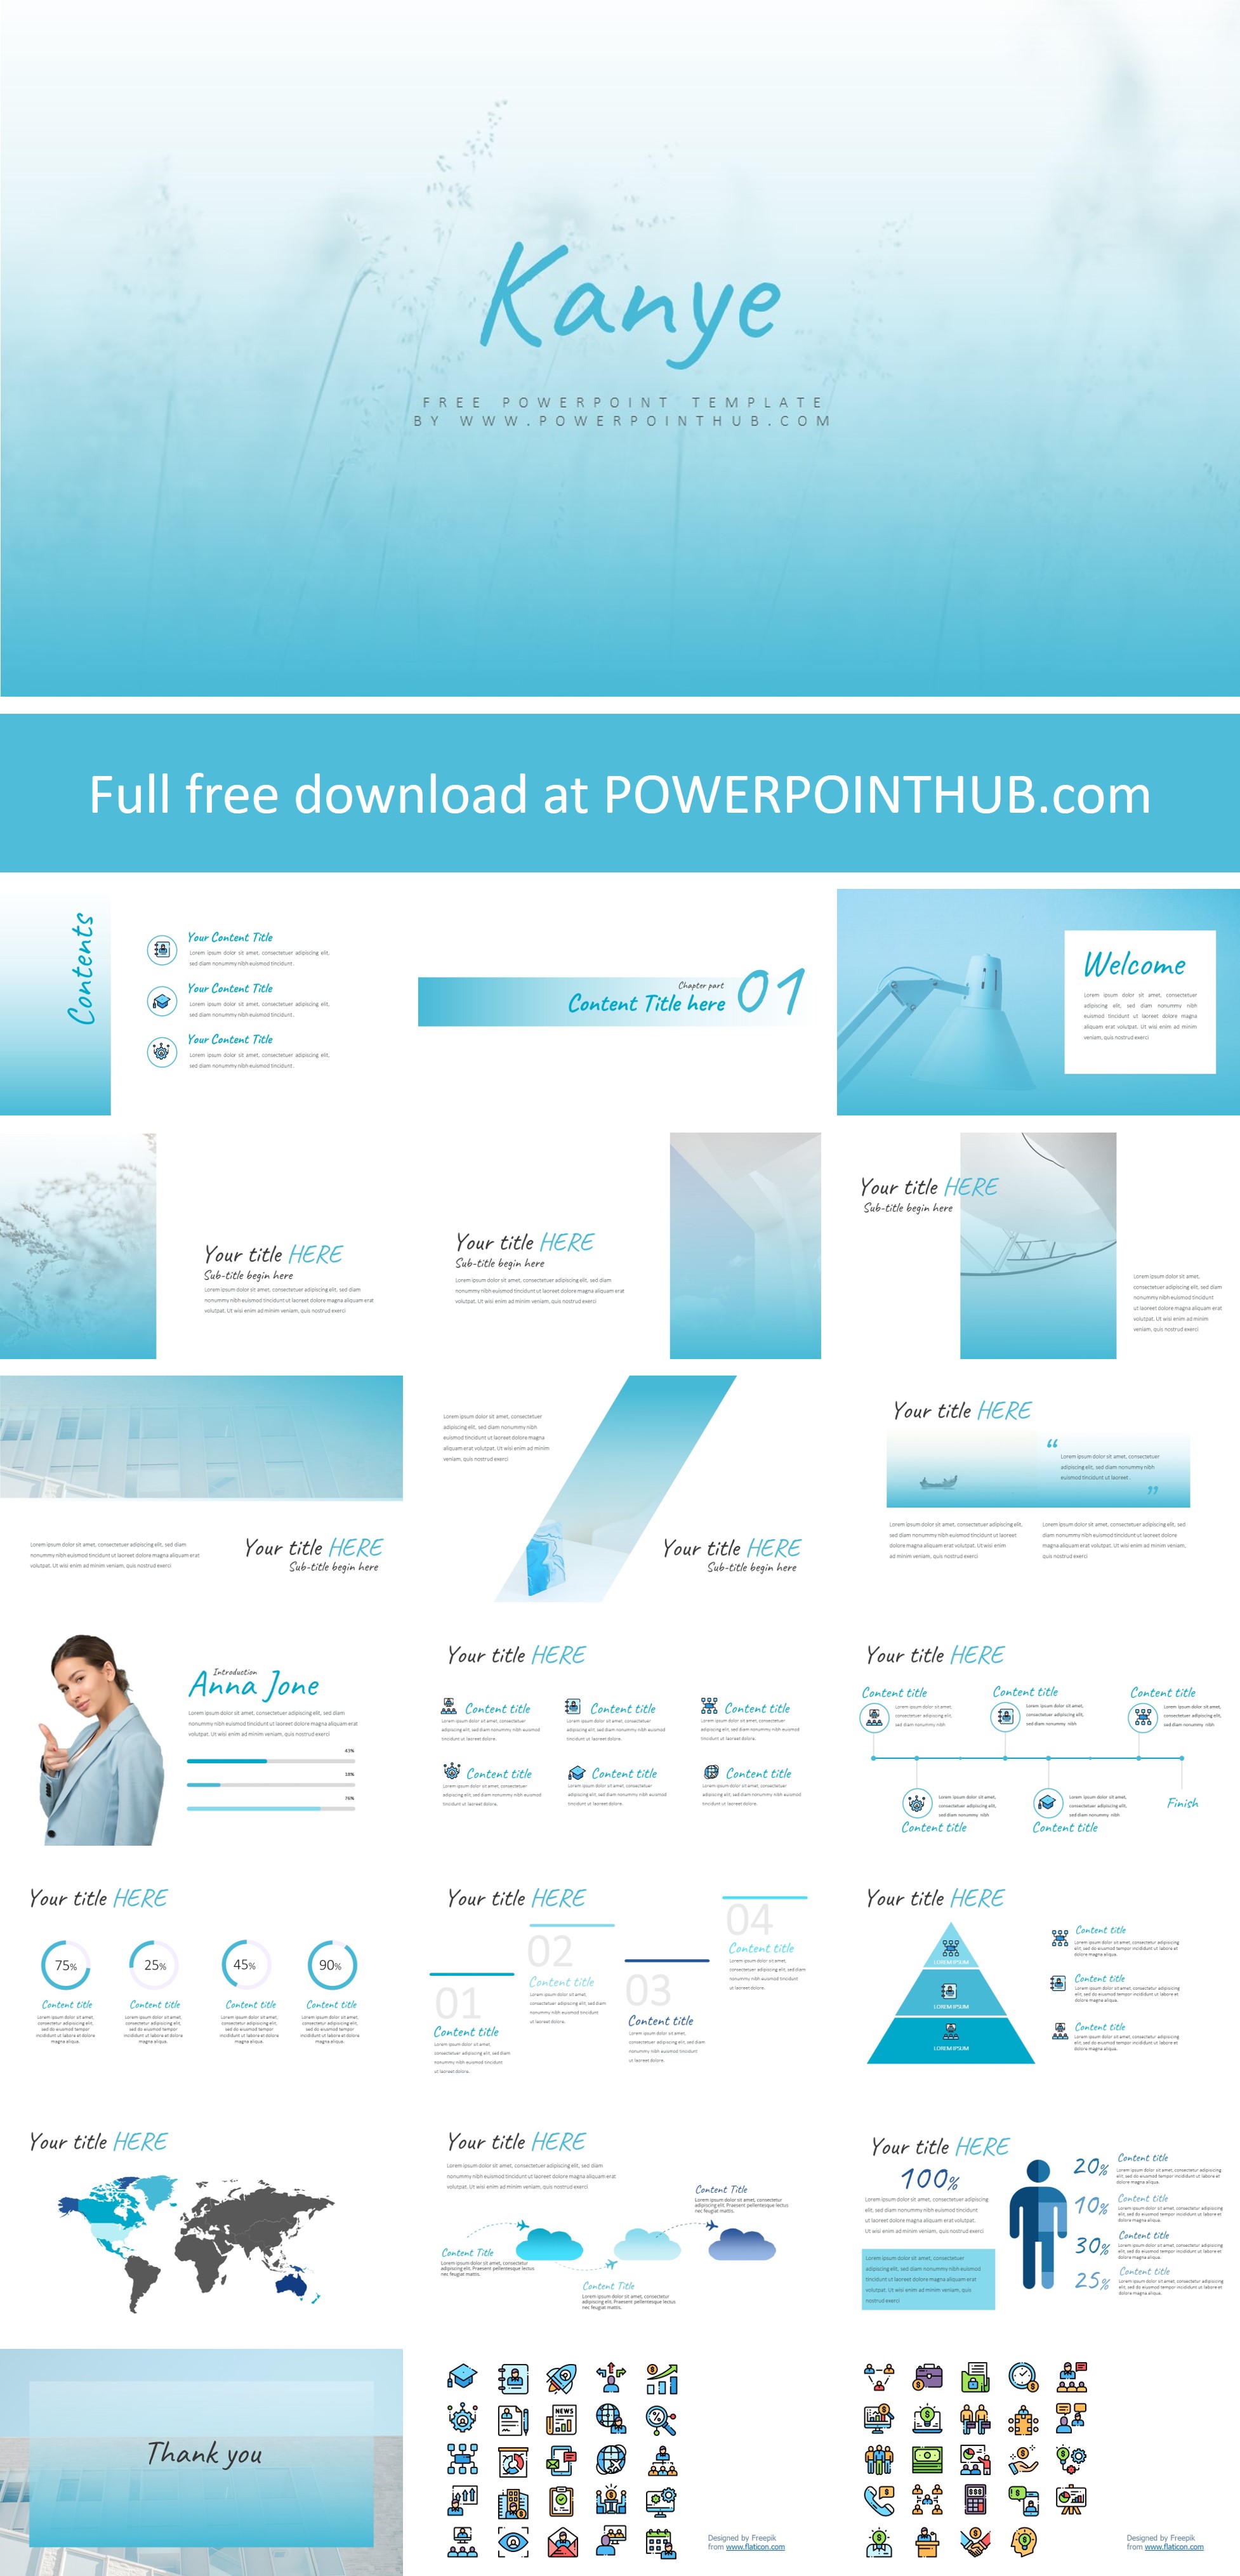 Do you want your audience to be attracted with this chill and cold PowerPoint template? Let’s freeze your audiences’ eyes with the Kanye minimal PowerPoint template.